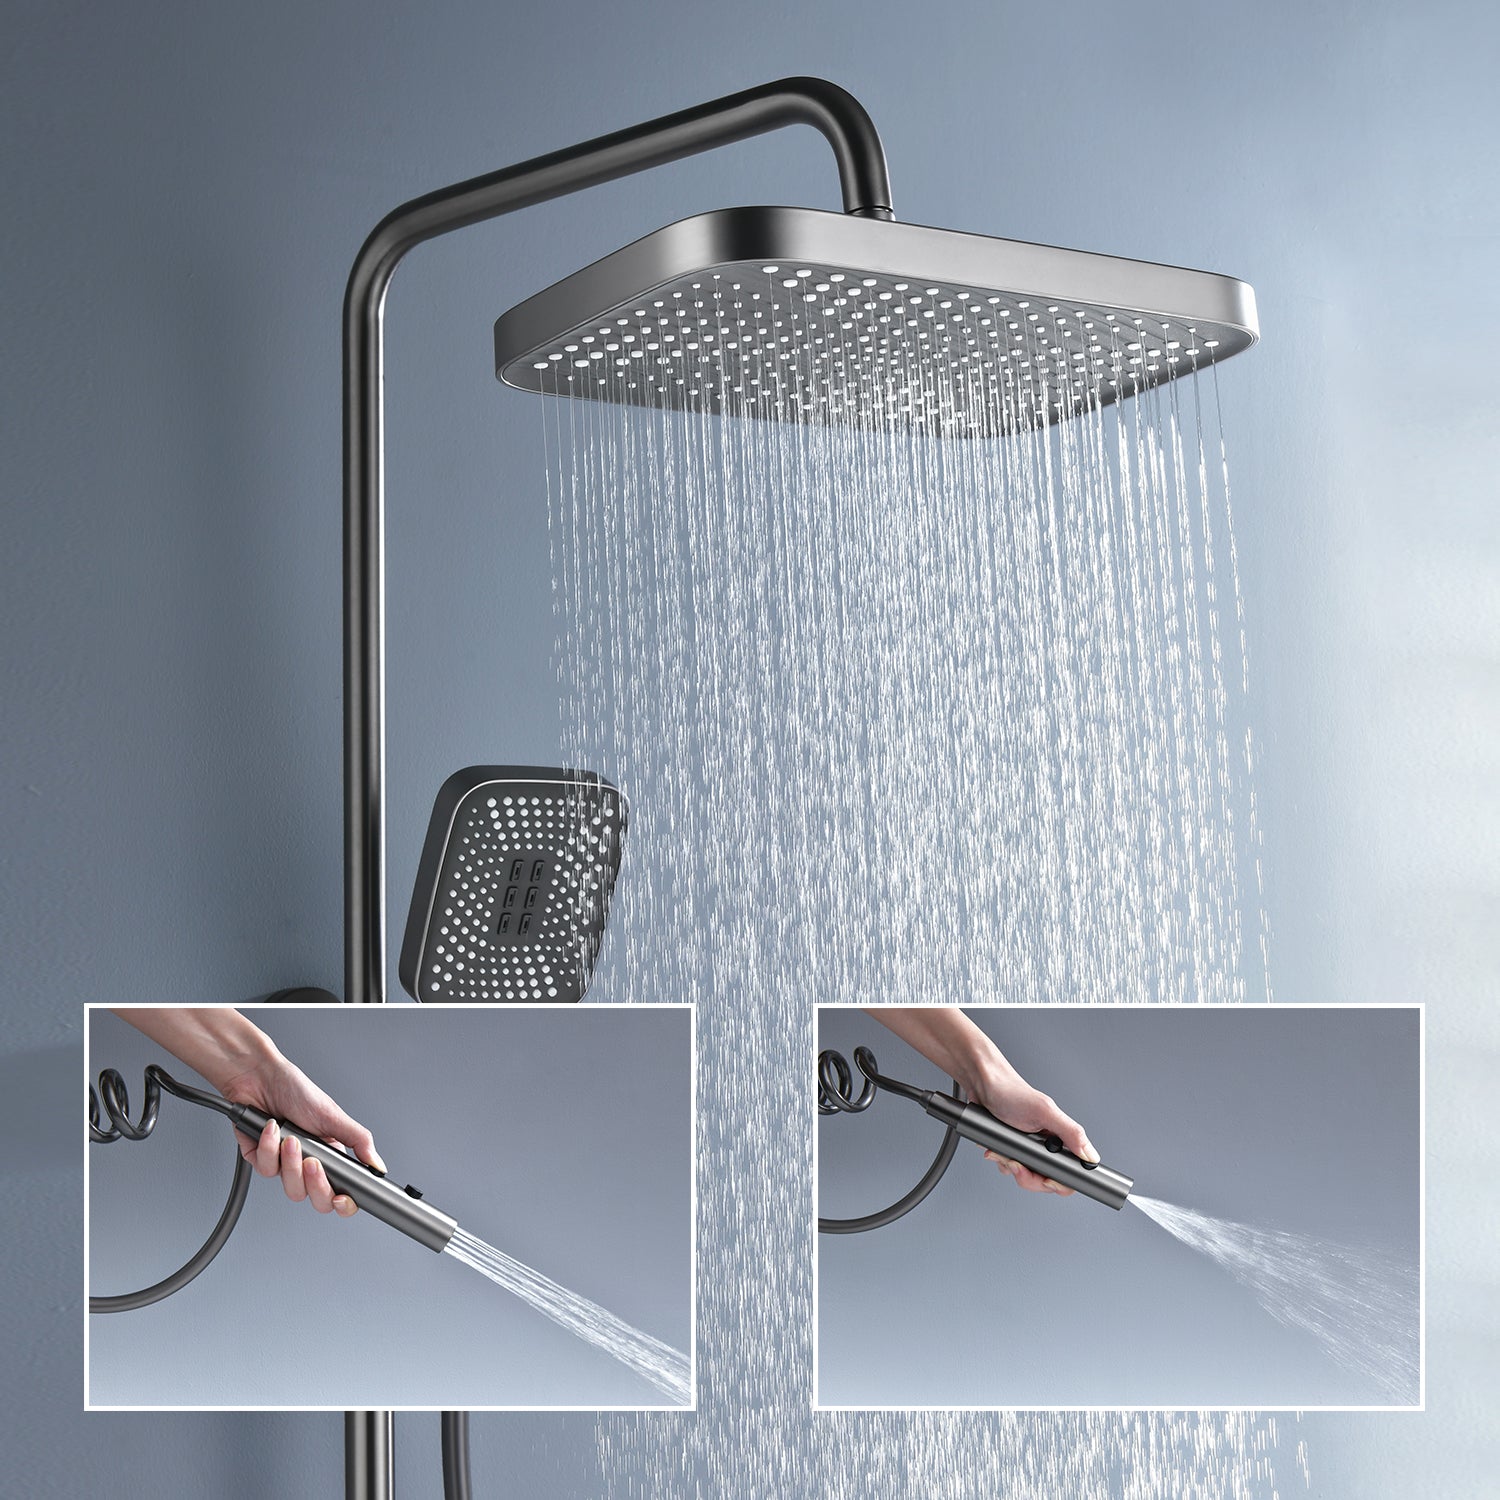 Lefton Shower System with Temperature Display and 4 Water Outlet Modes-SST2201